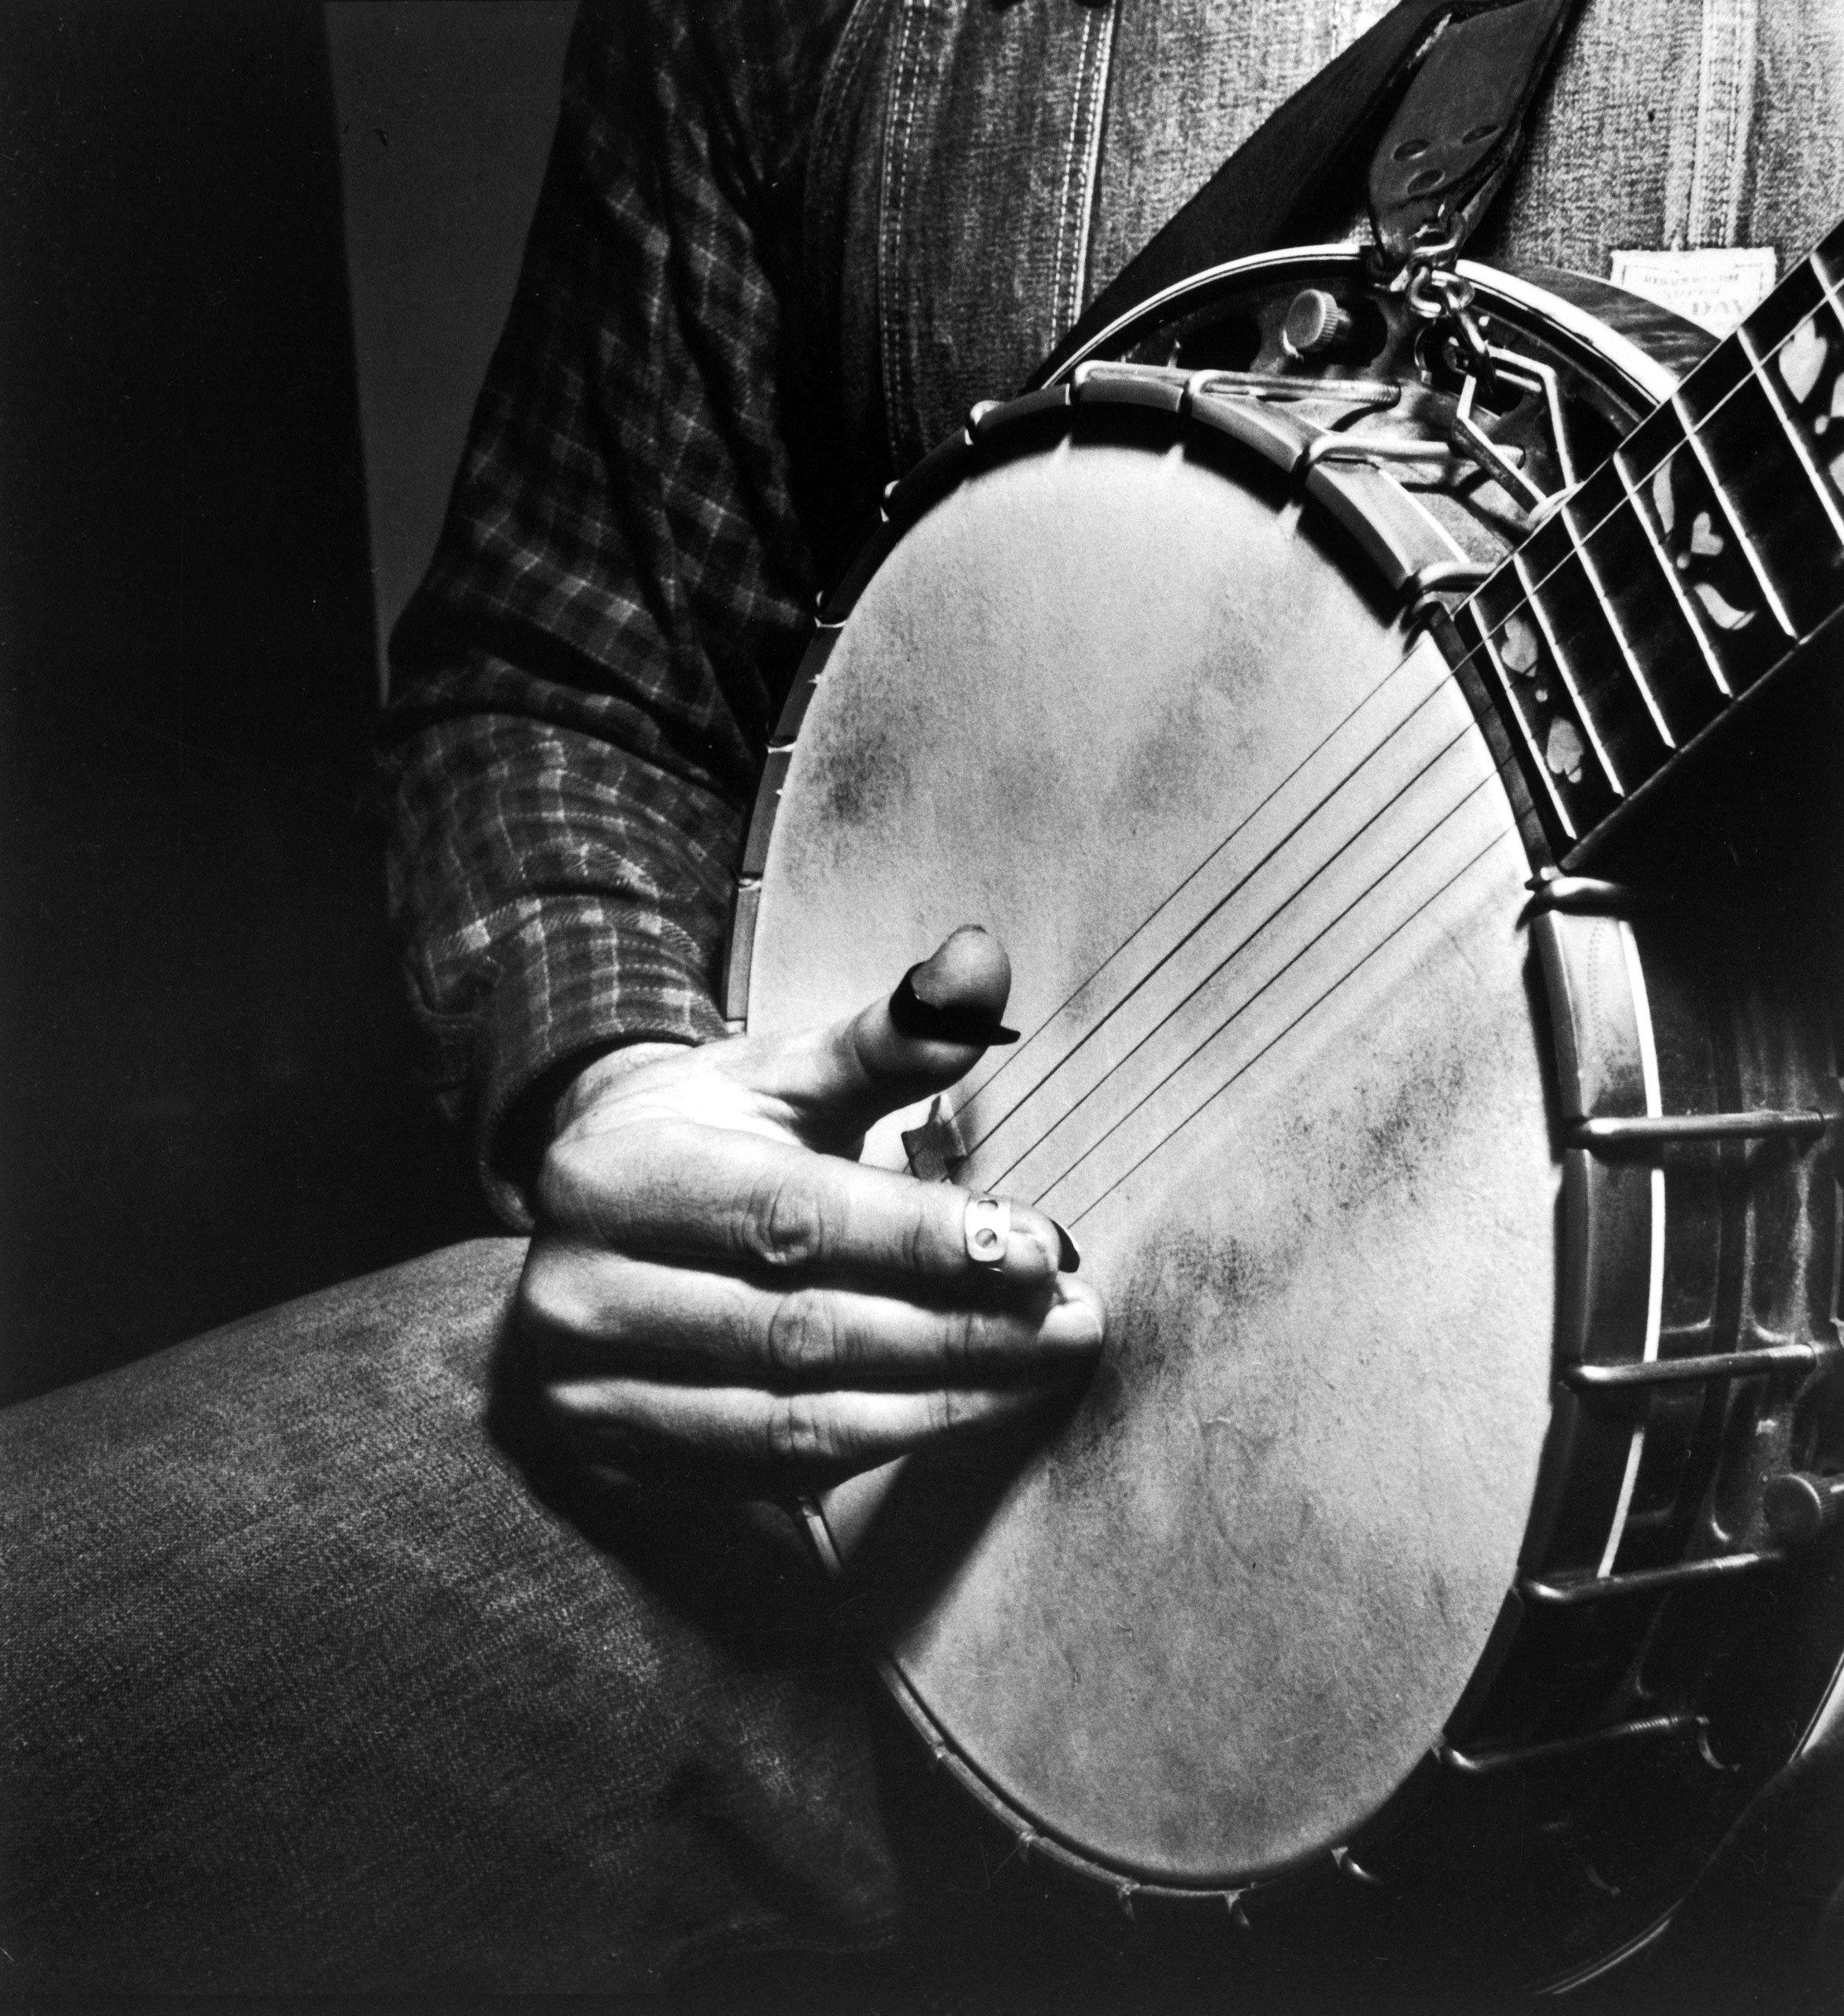 Country music staple; the banjo.